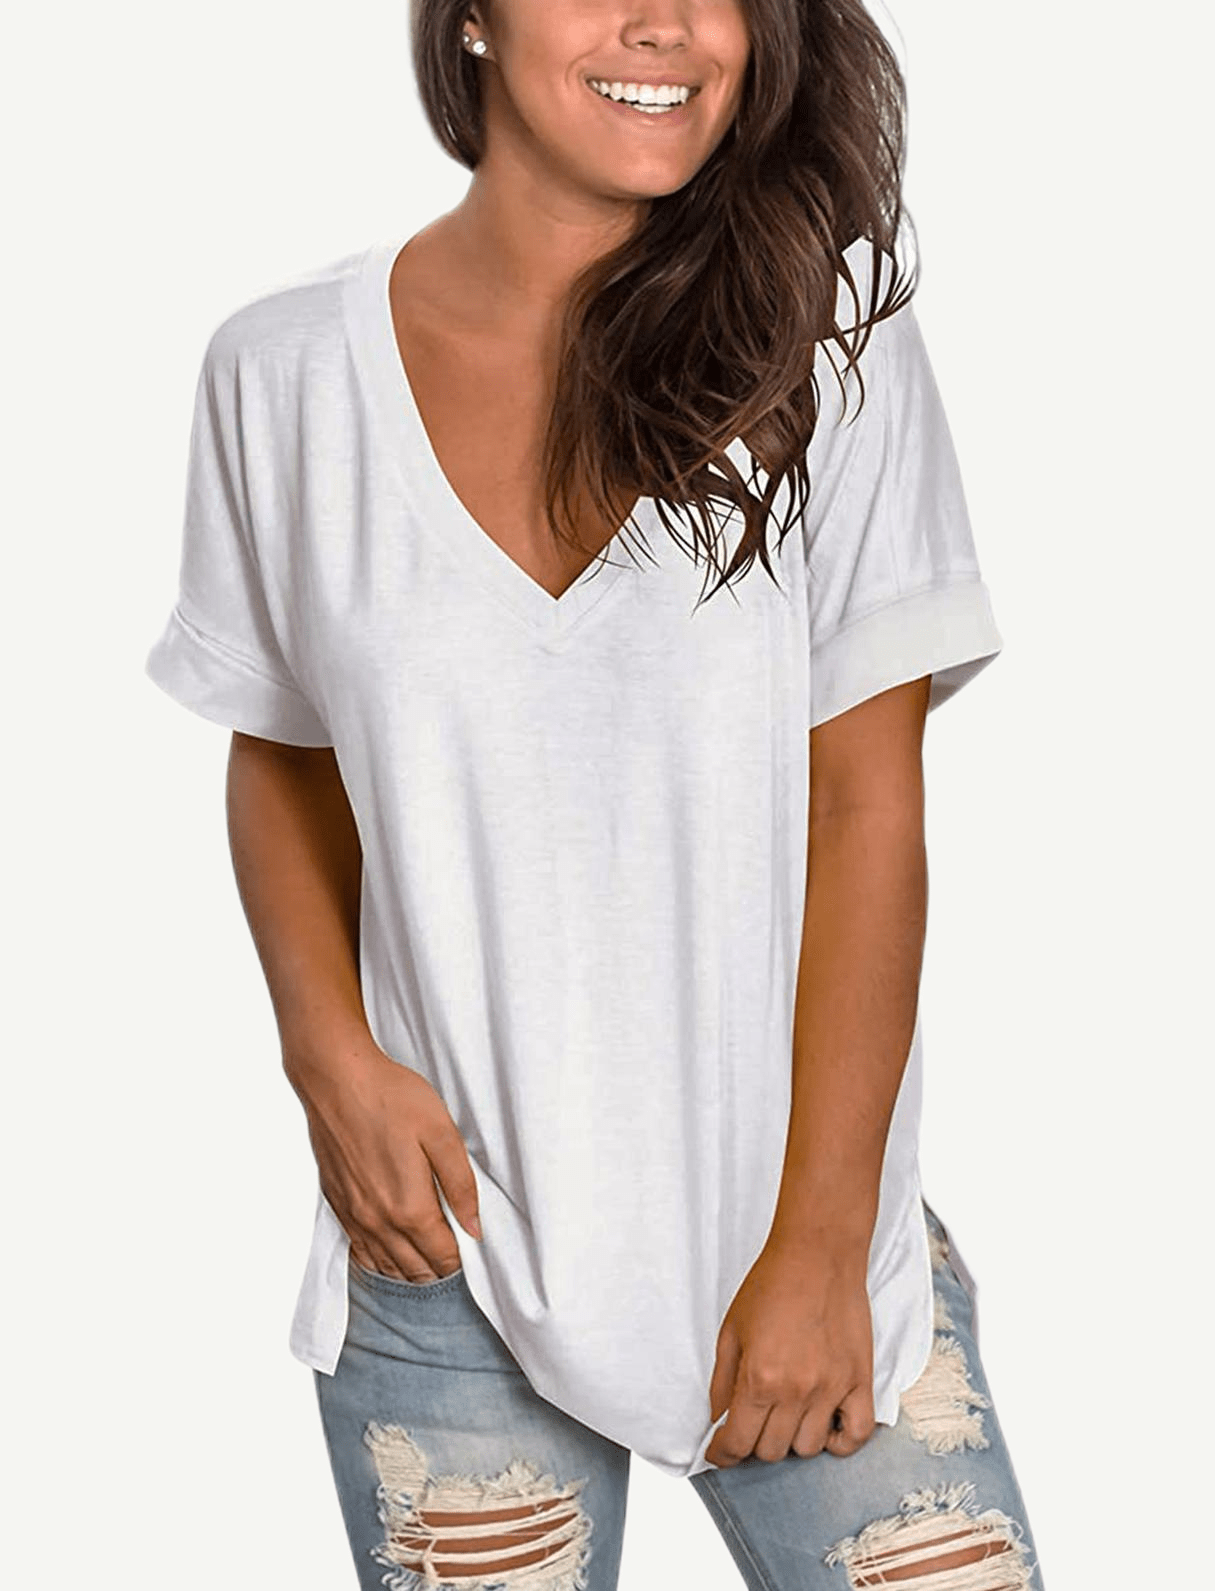 Wholesale Cool And Comfortable In Summer Top T-Shirt